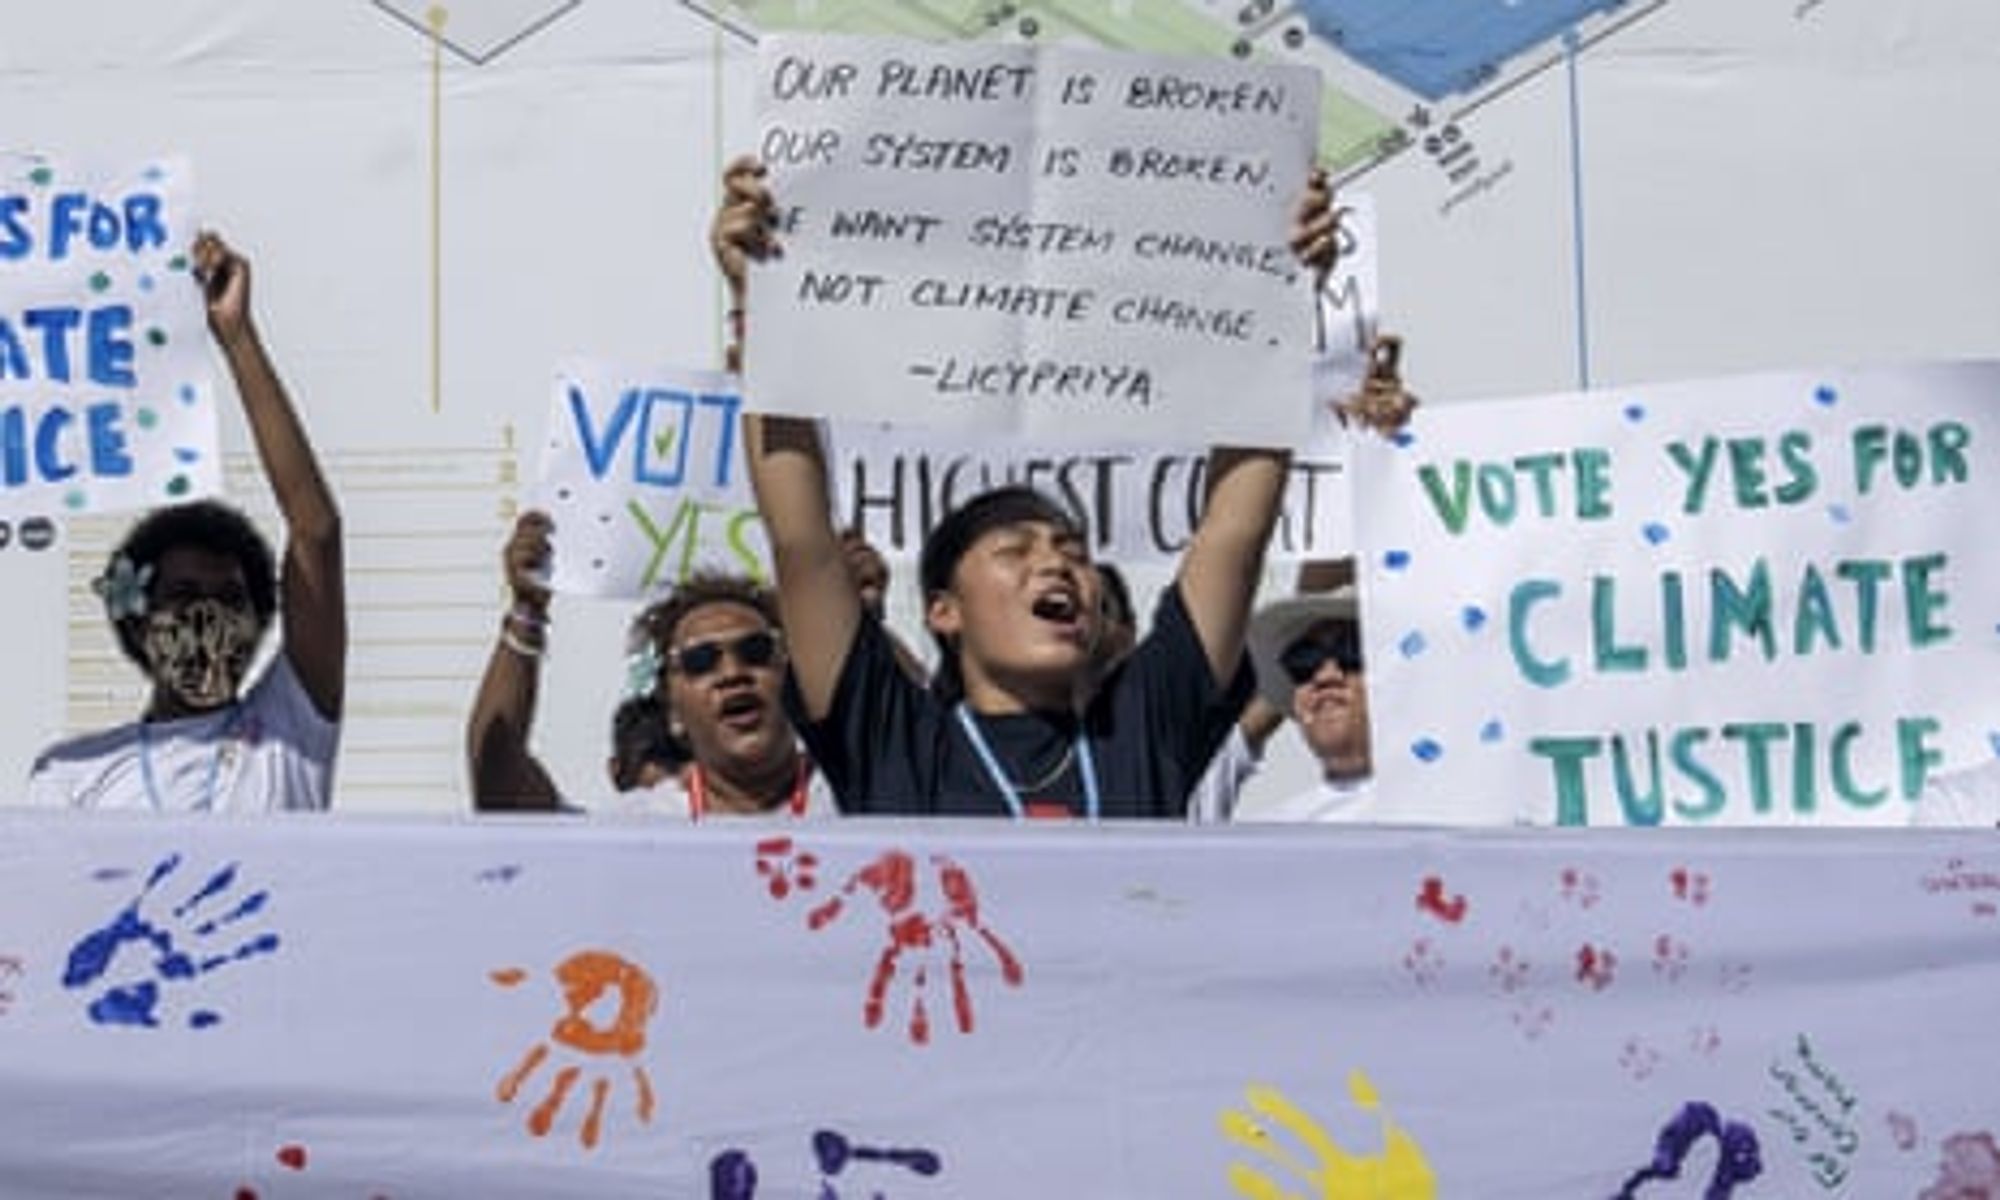 ‘Beginning of a new era’: Pacific islanders hail UN vote on climate justice | Pacific islands | The Guardian